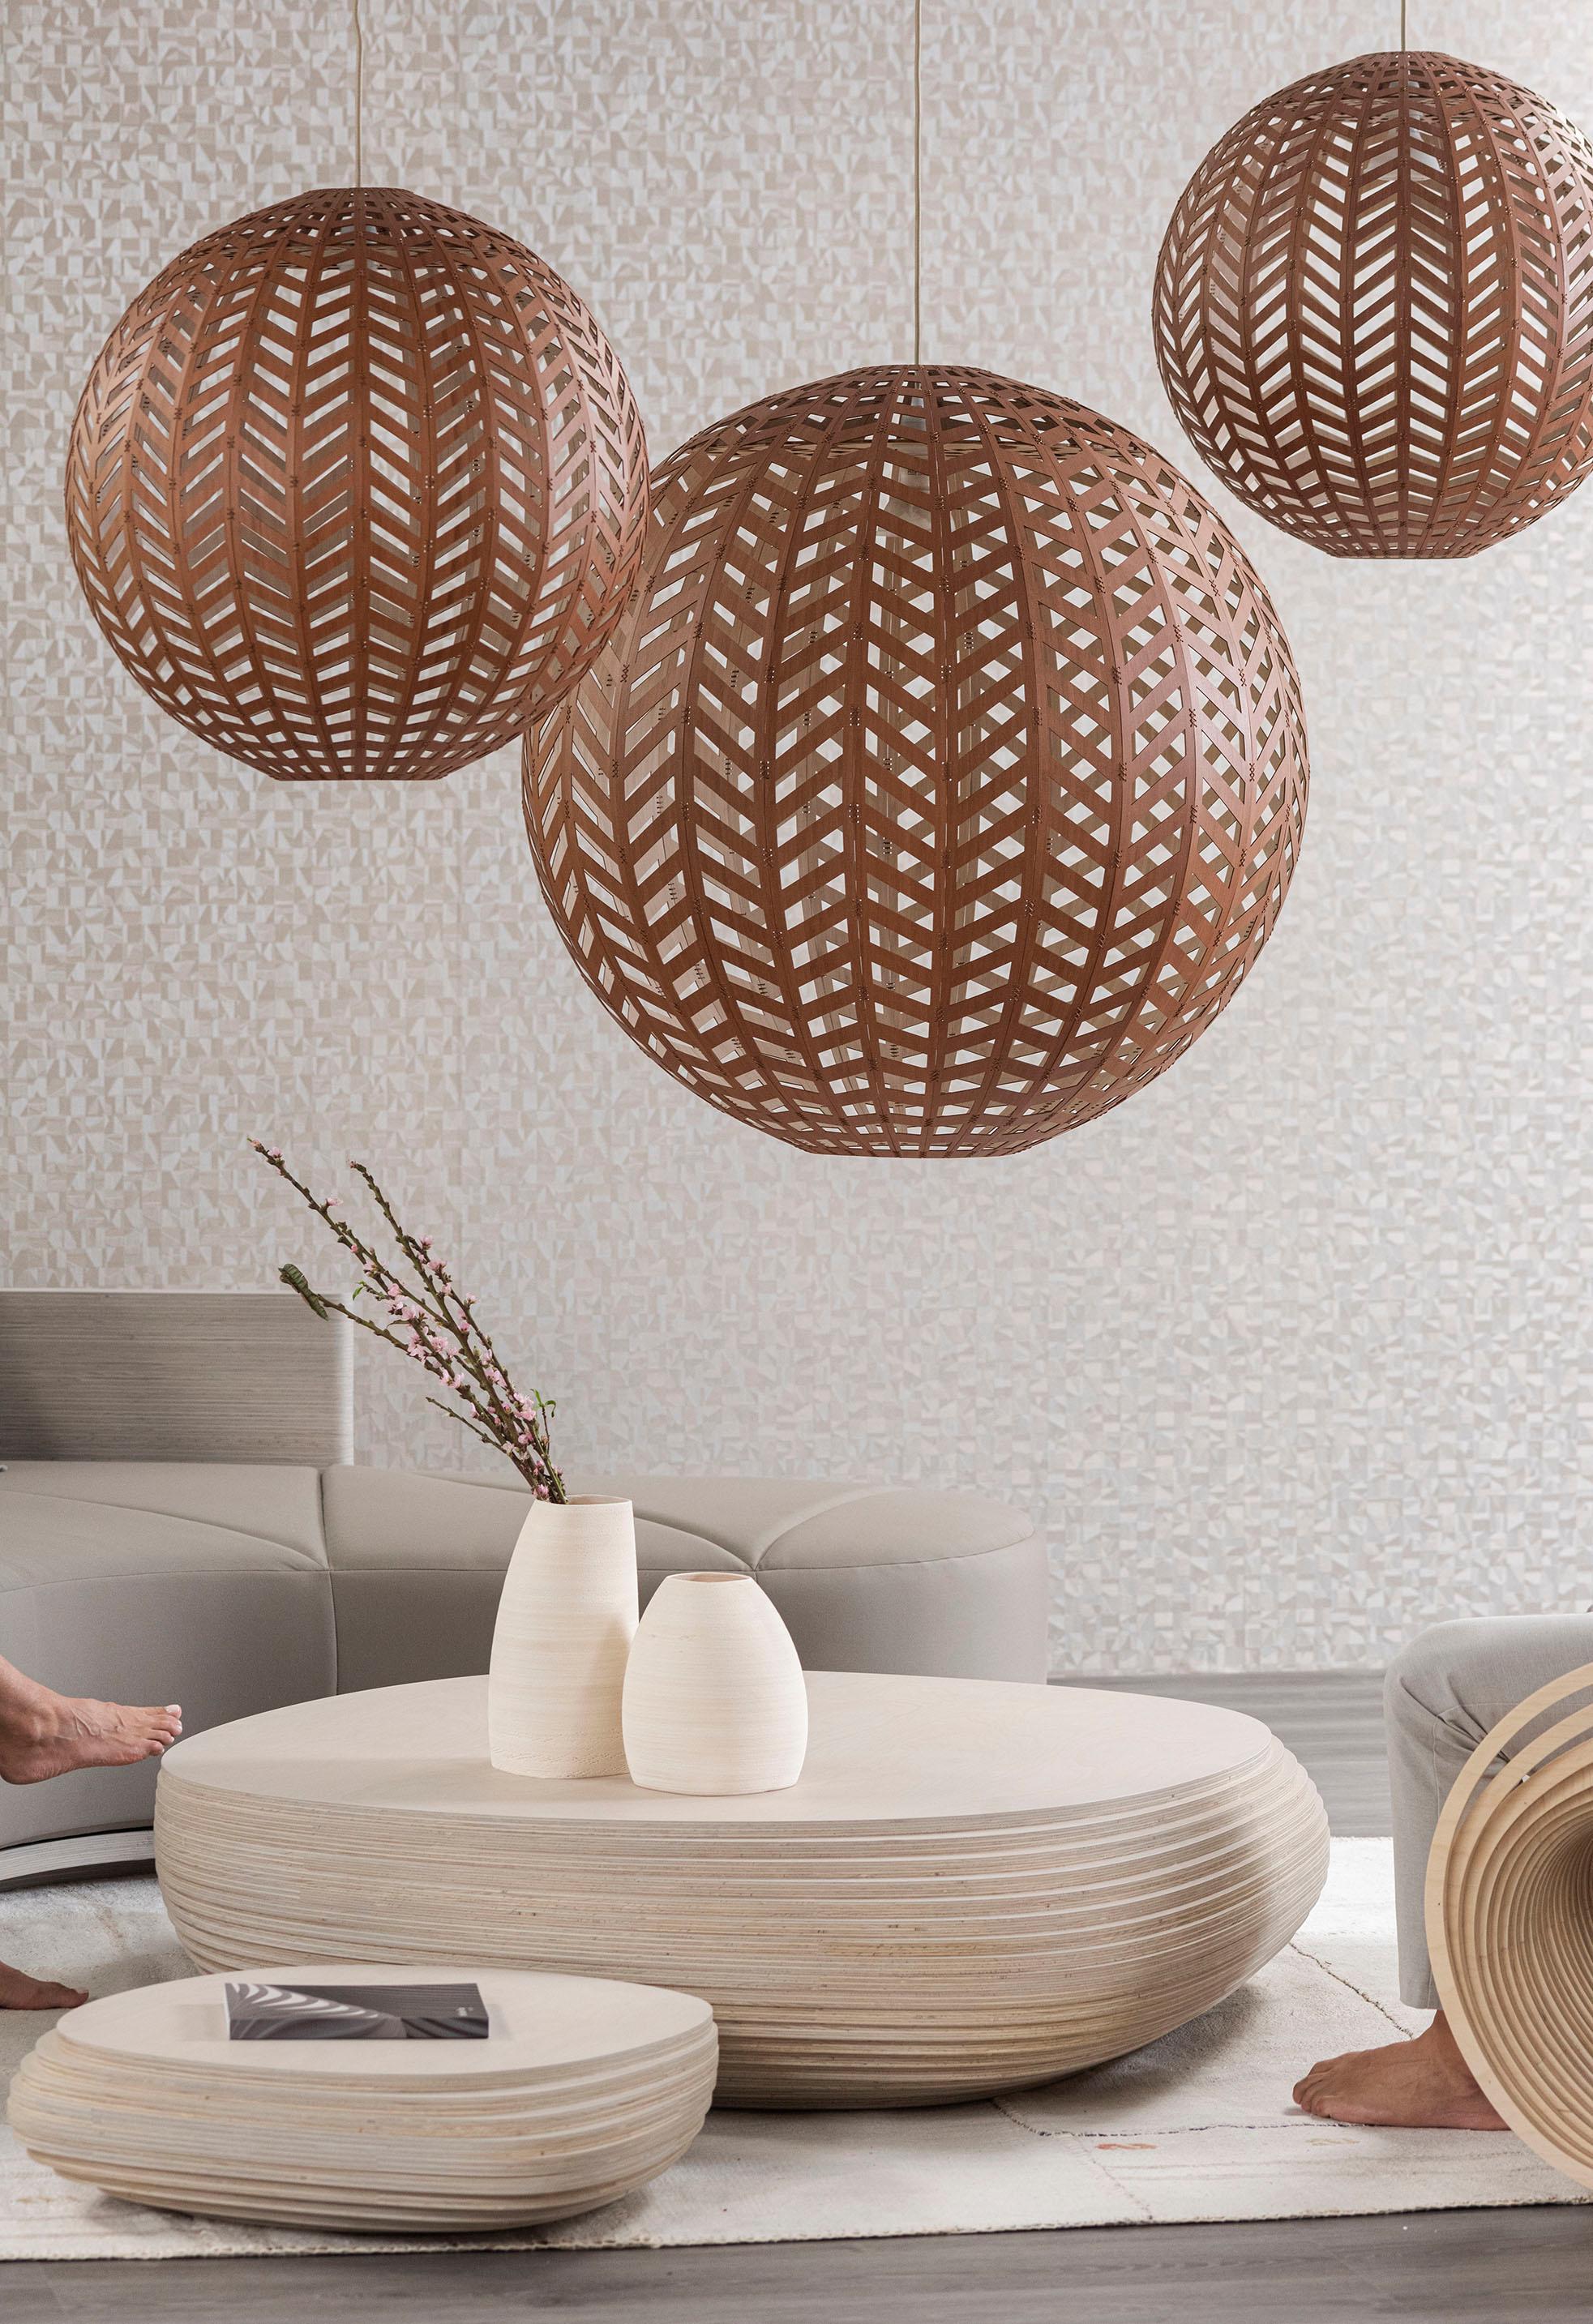 Hand-Woven Panelitos Orb Lamp Medium by Piegatto, a Contemporary Sculptural Lamp For Sale